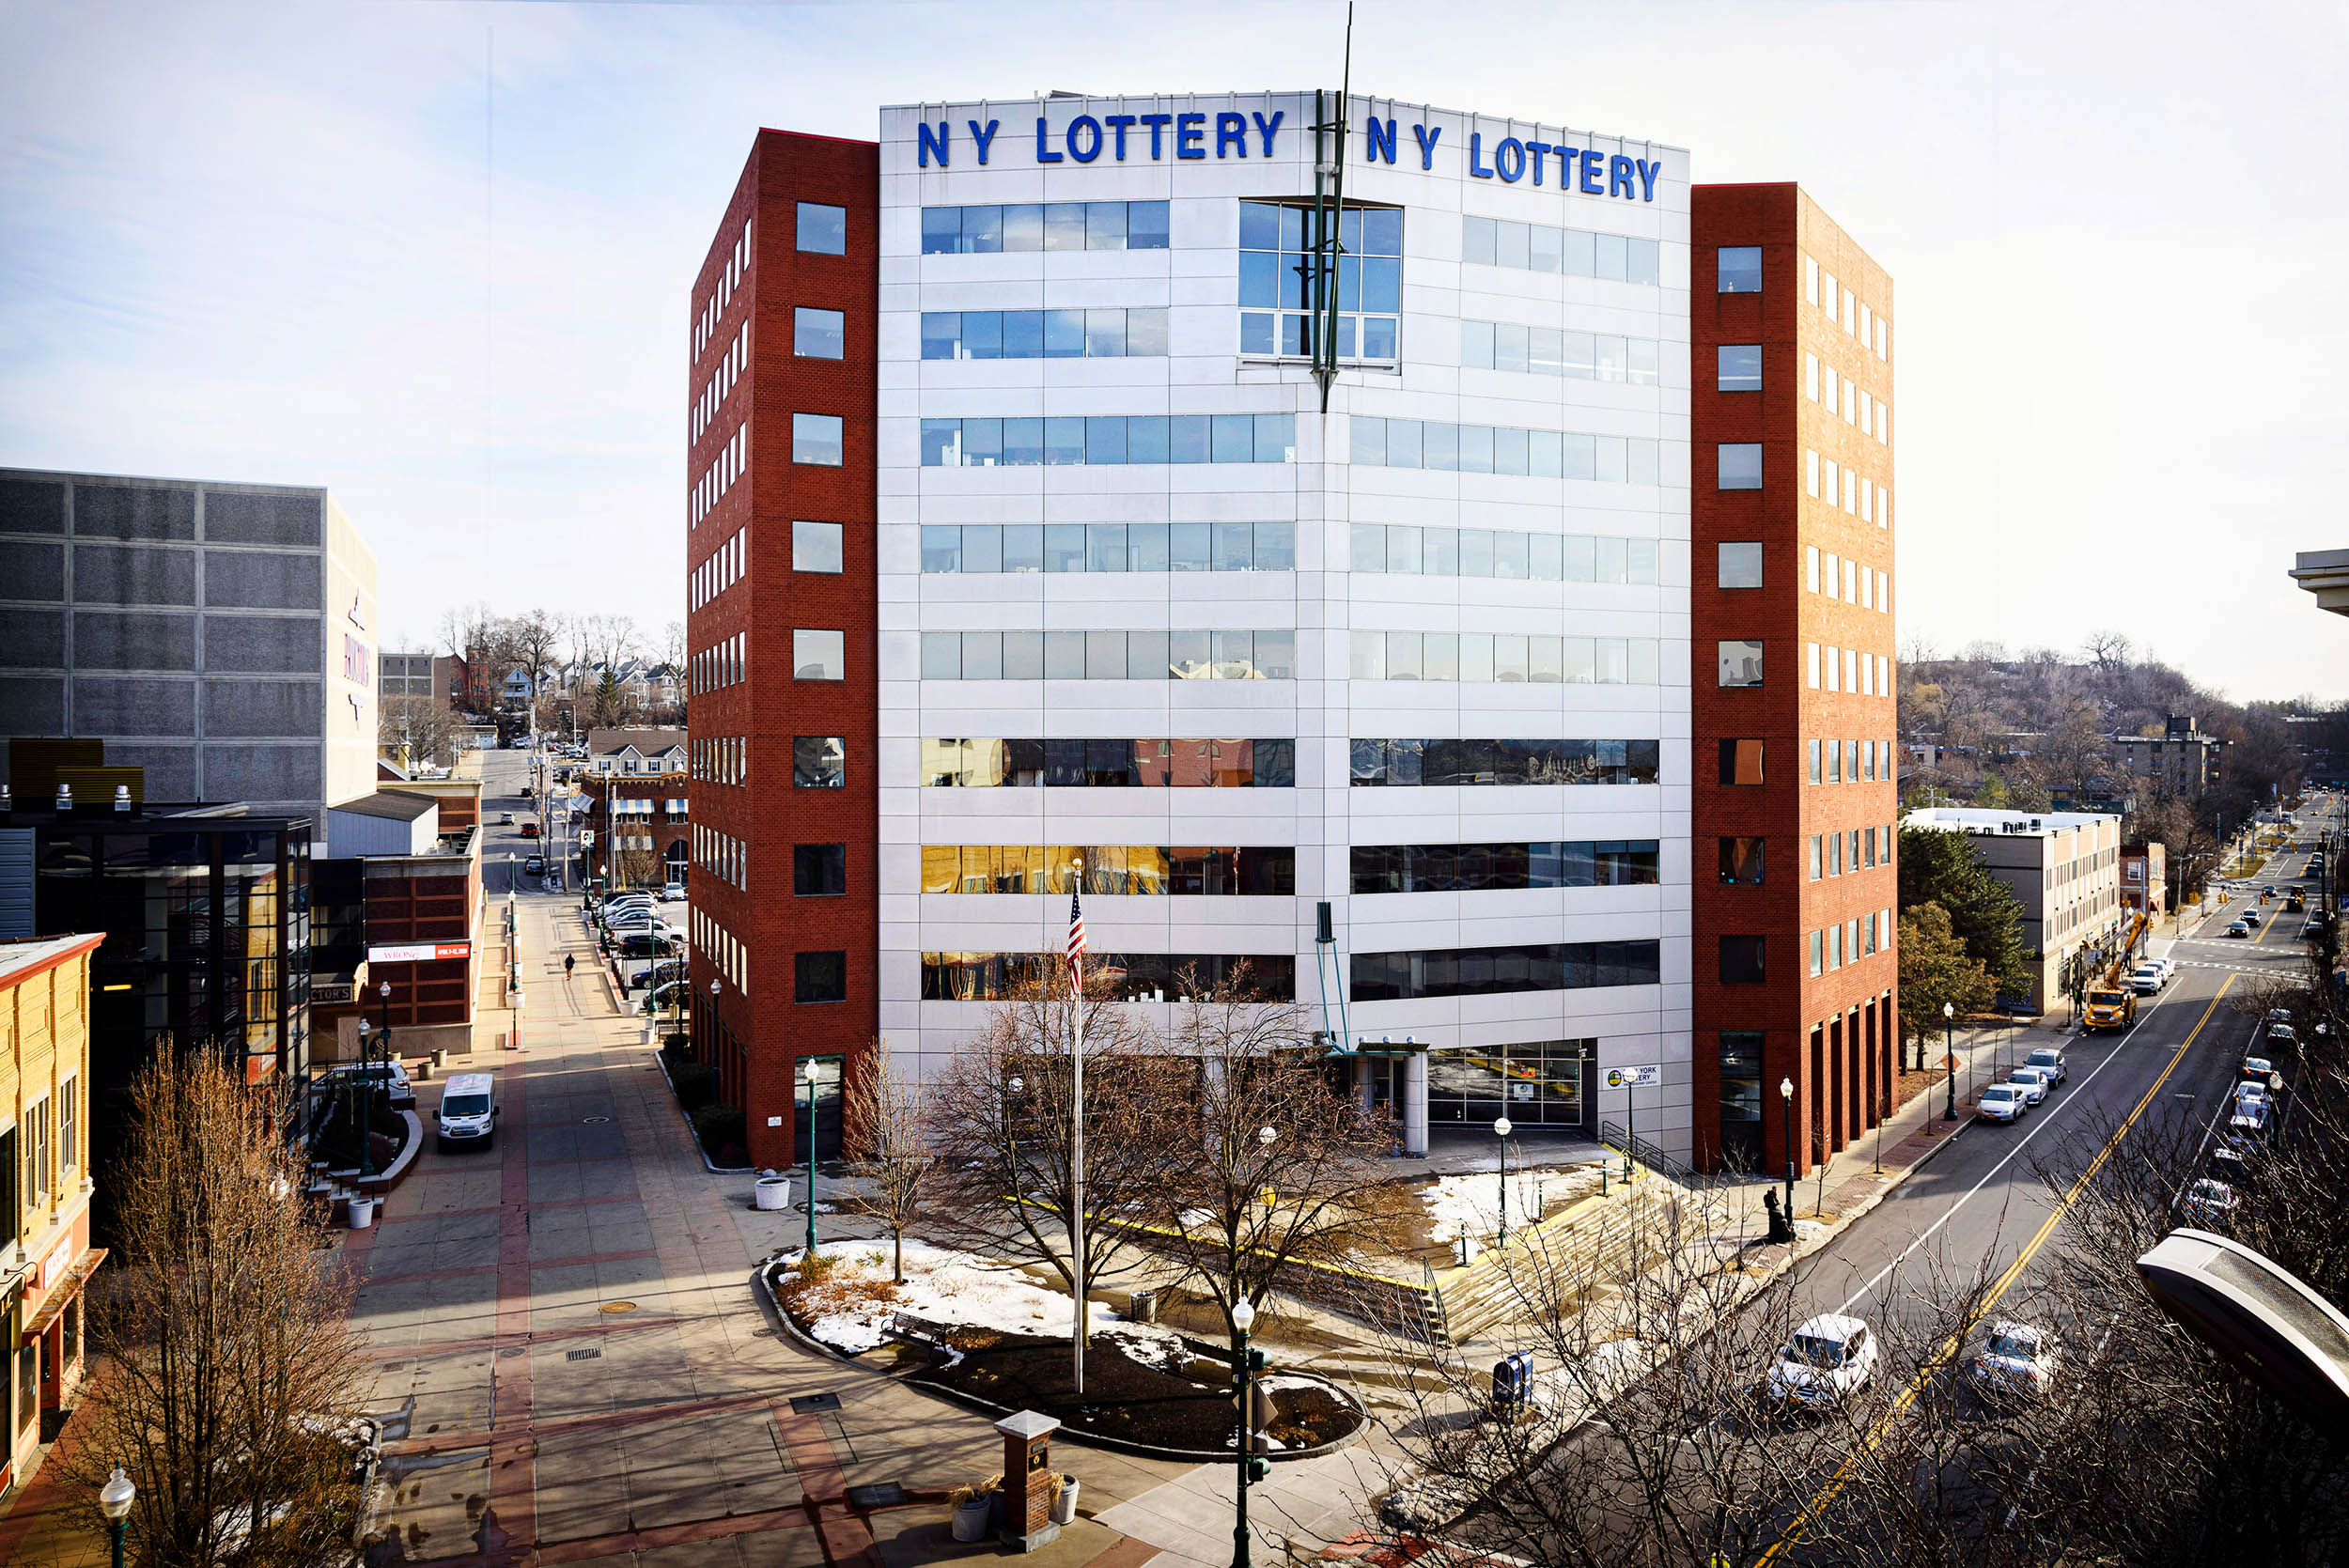 New York lottery building in Schenectady exterior commercial building photography by Mitch Wojnarowicz